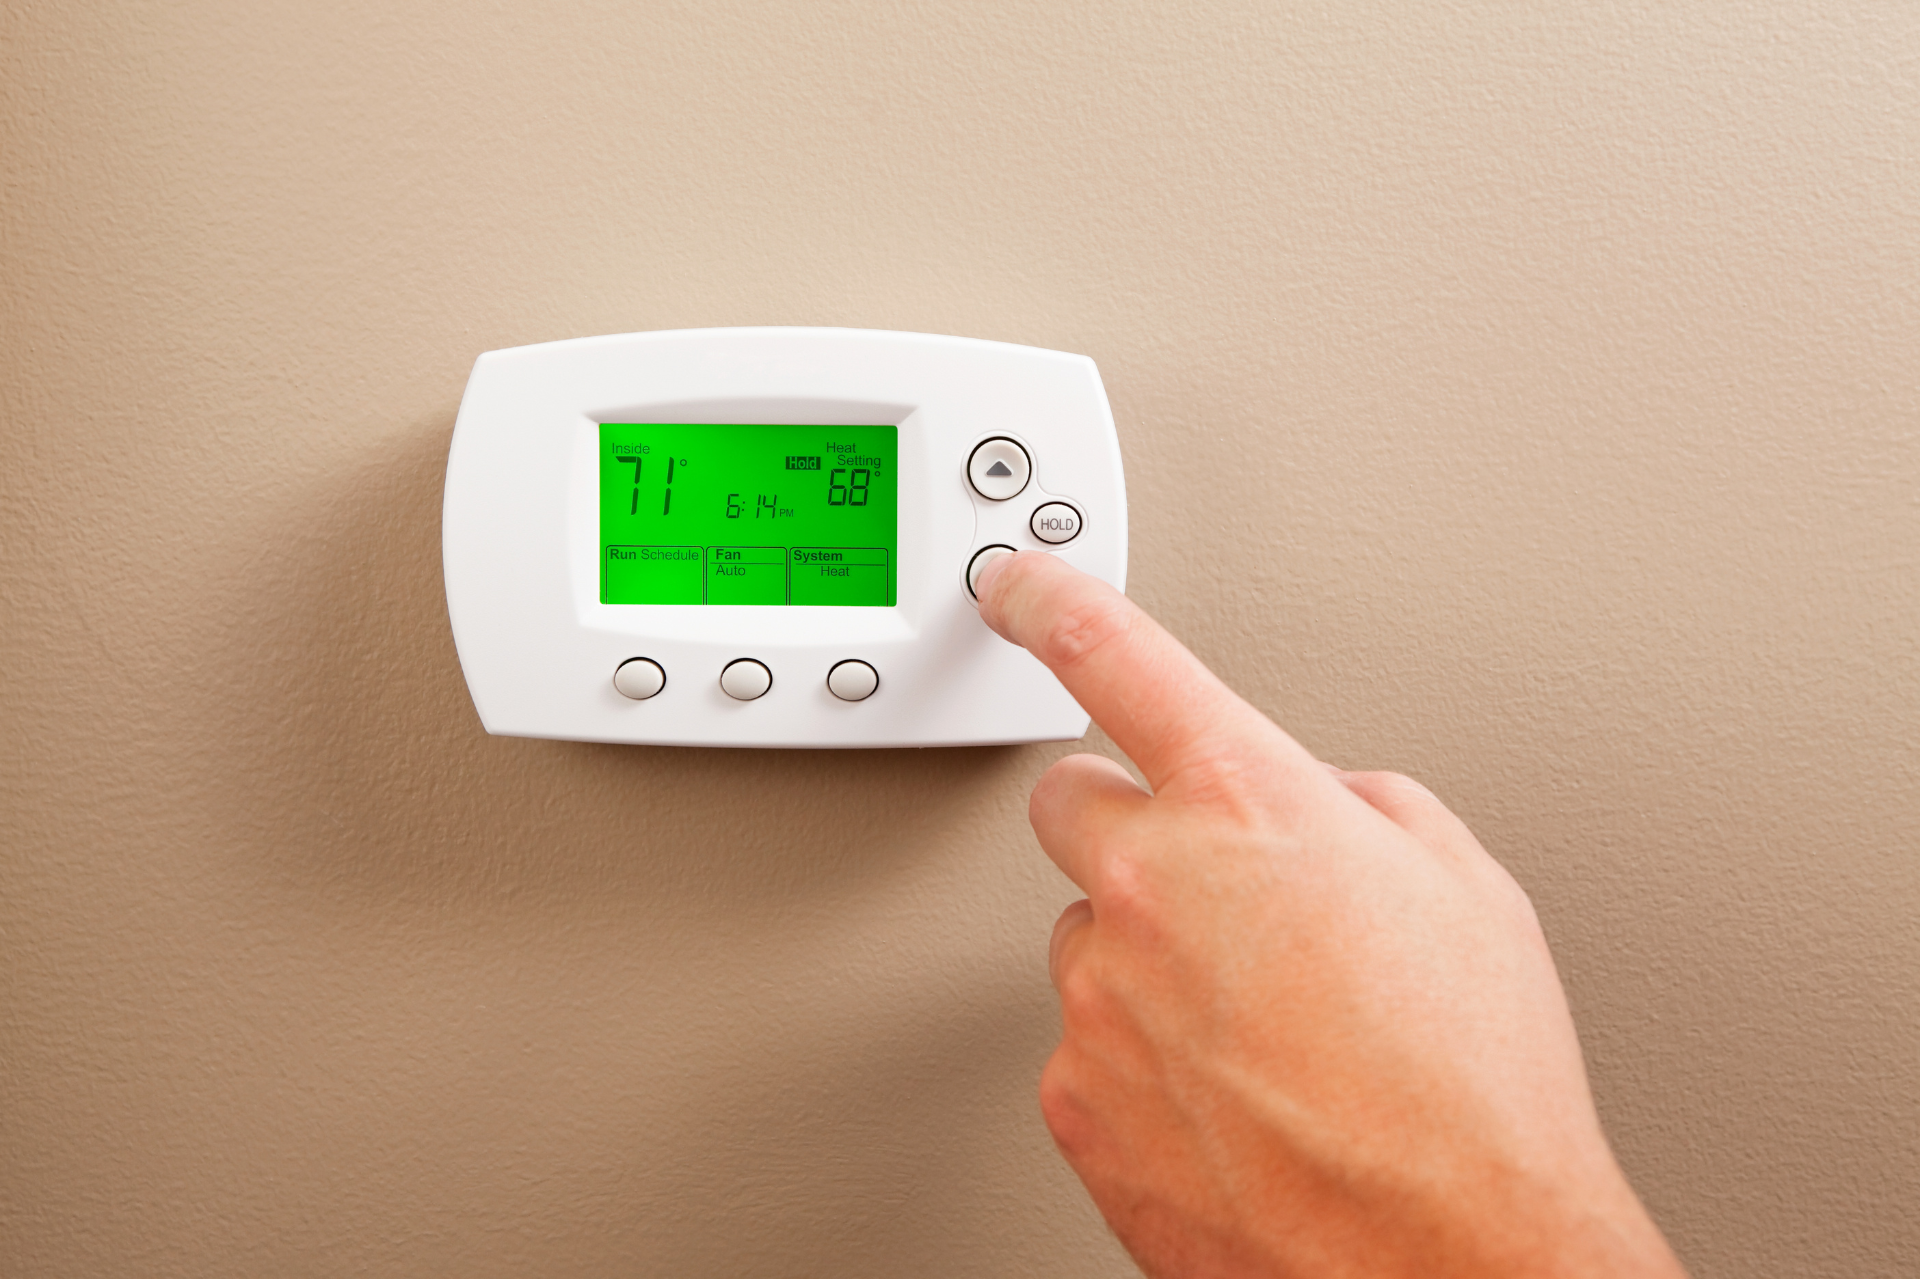 a person is adjusting a thermostat on a wall .